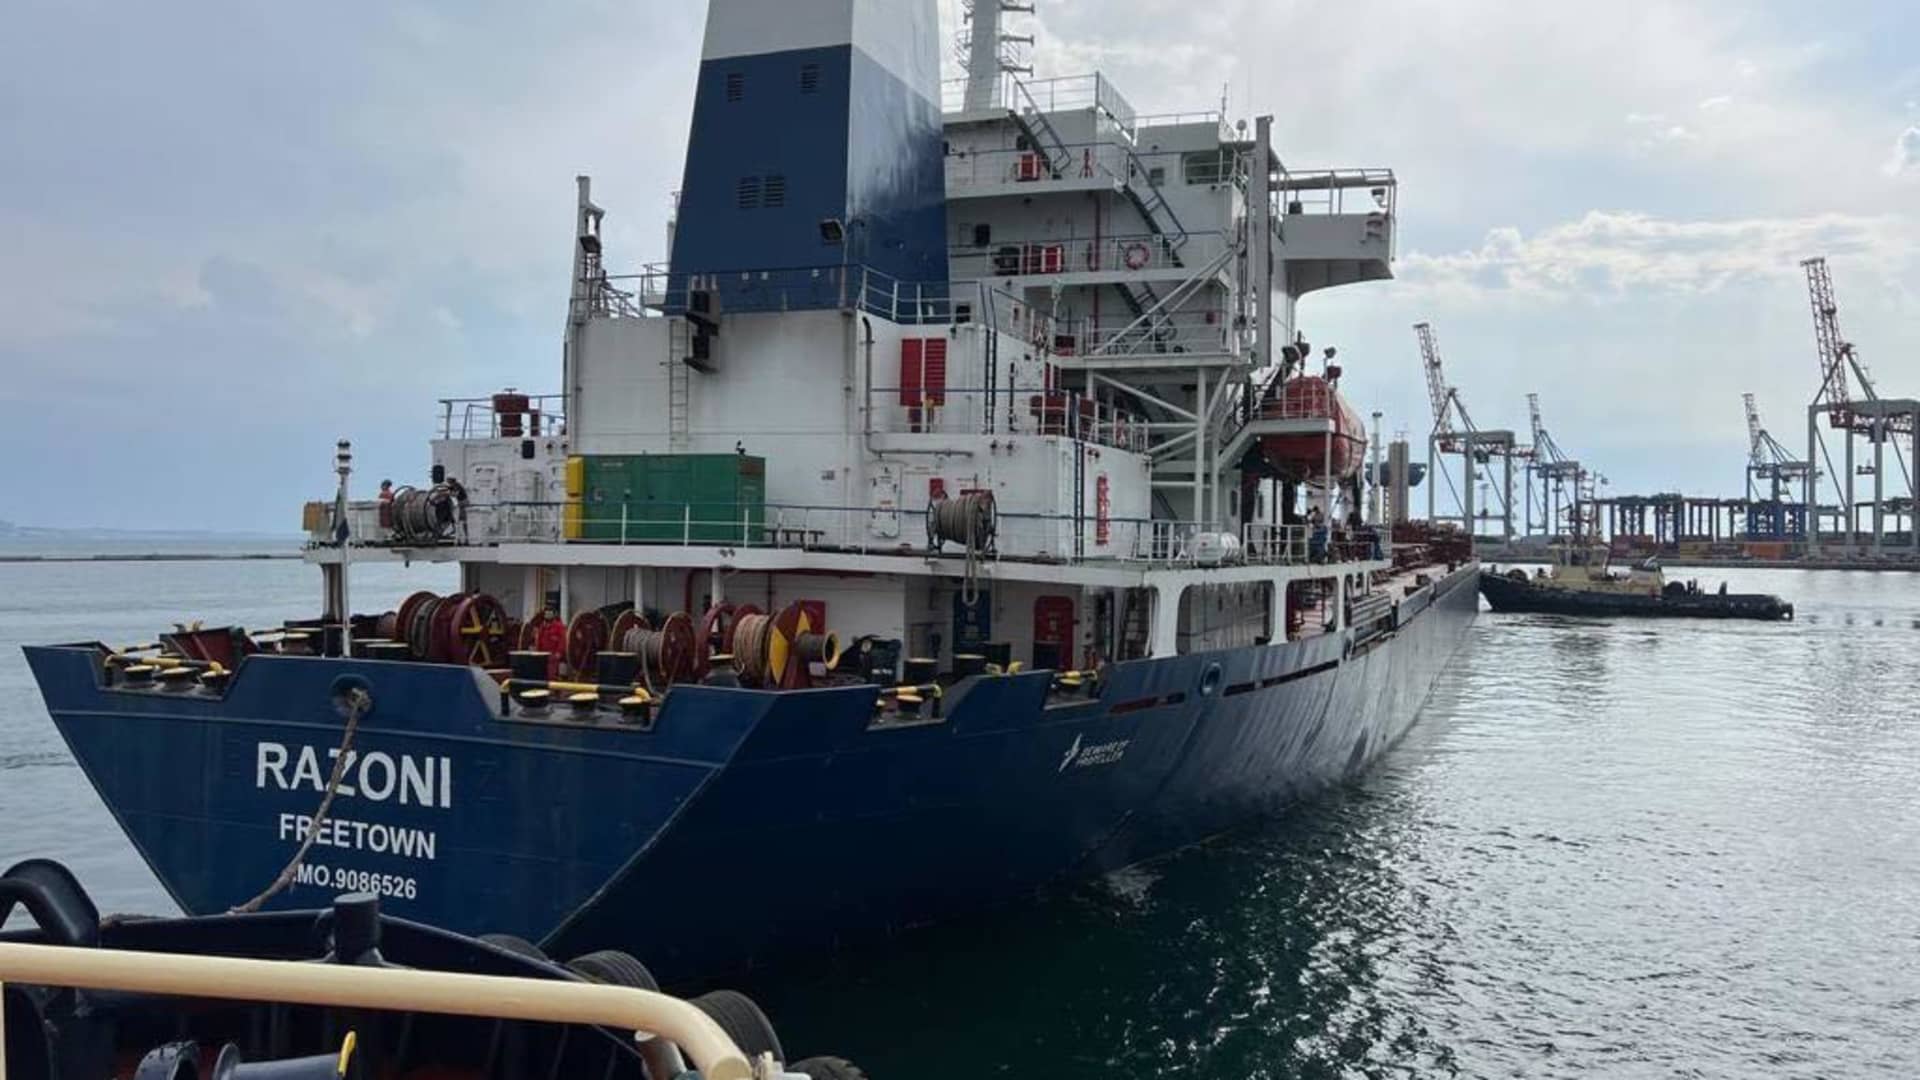 Sierra Leone-flagged dry cargo ship Razoni departs from port of Odesa in Odessa, Ukraine on August 01, 2022 as part of a recent grain export deal signed between Turkey, the UN, Russia, and Ukraine and expected to reach Istanbul tomorrow.